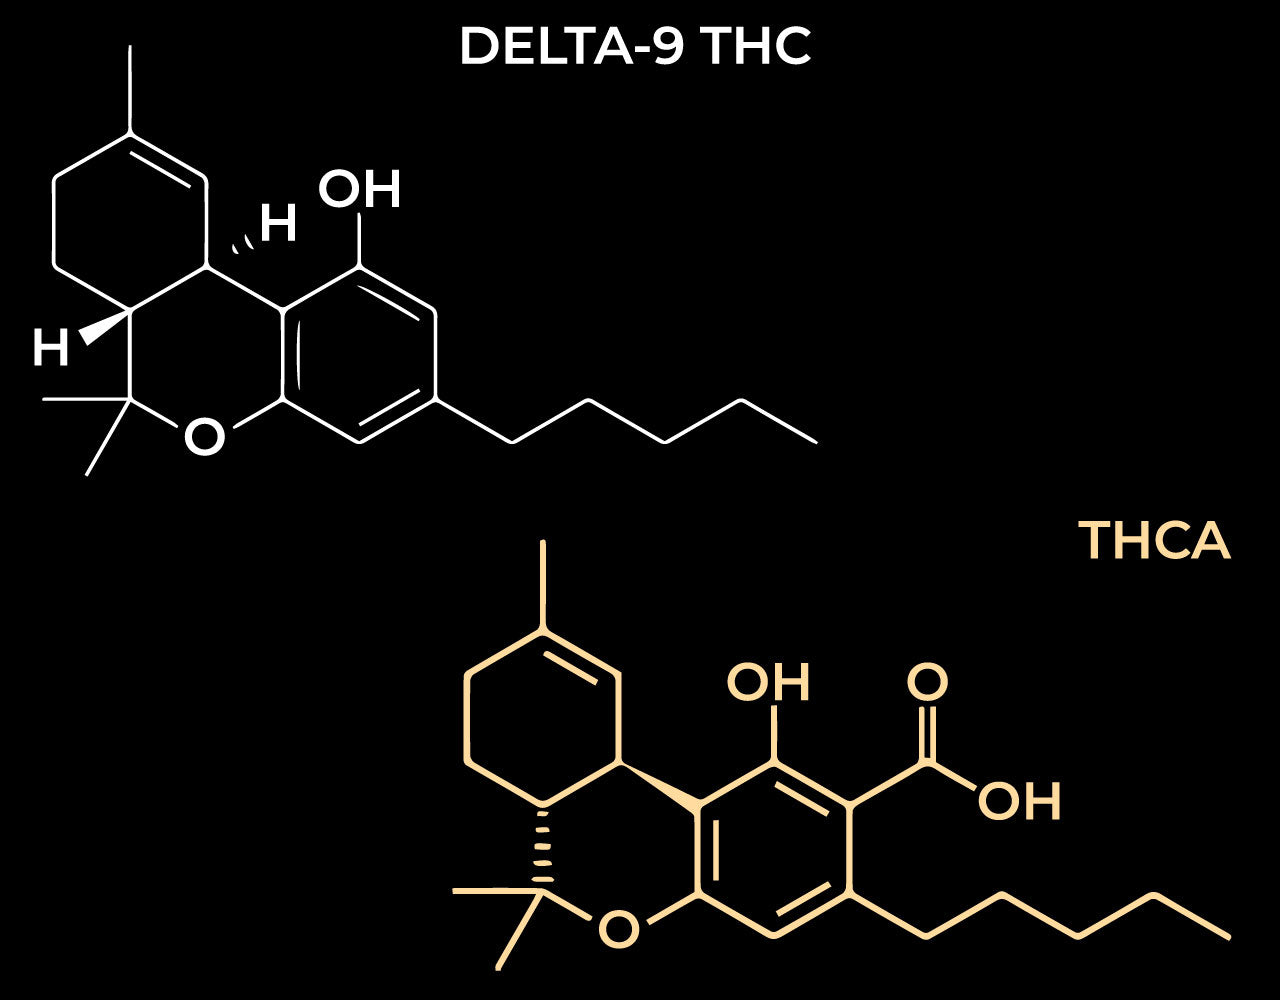 Informational graphic featuring the Delta-9 THC and THCa molecular structures.